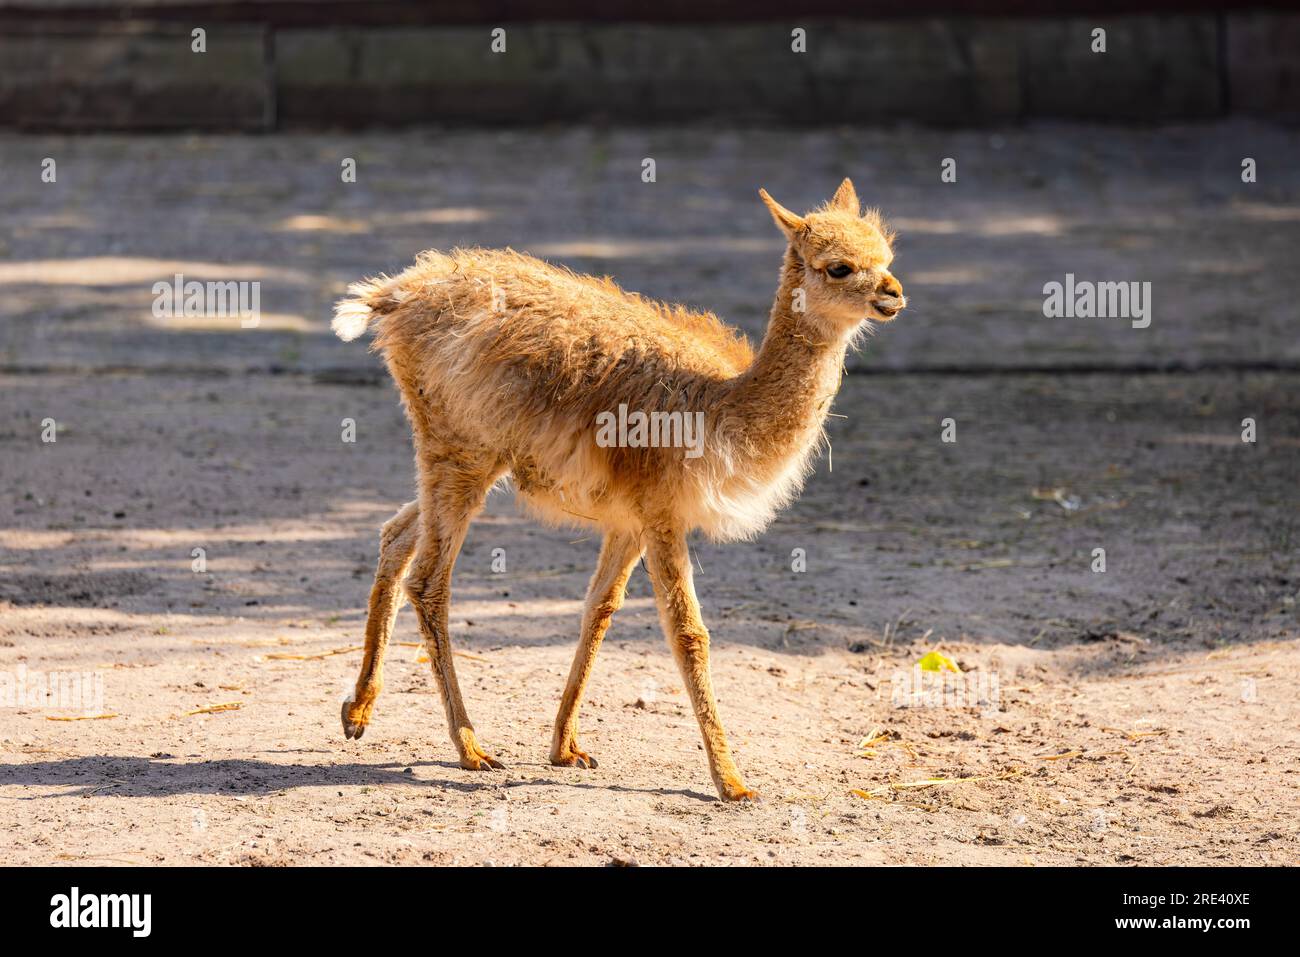 A young vinkunja or vicuna in a zoo has a lot of valuable wool, Germany Stock Photo